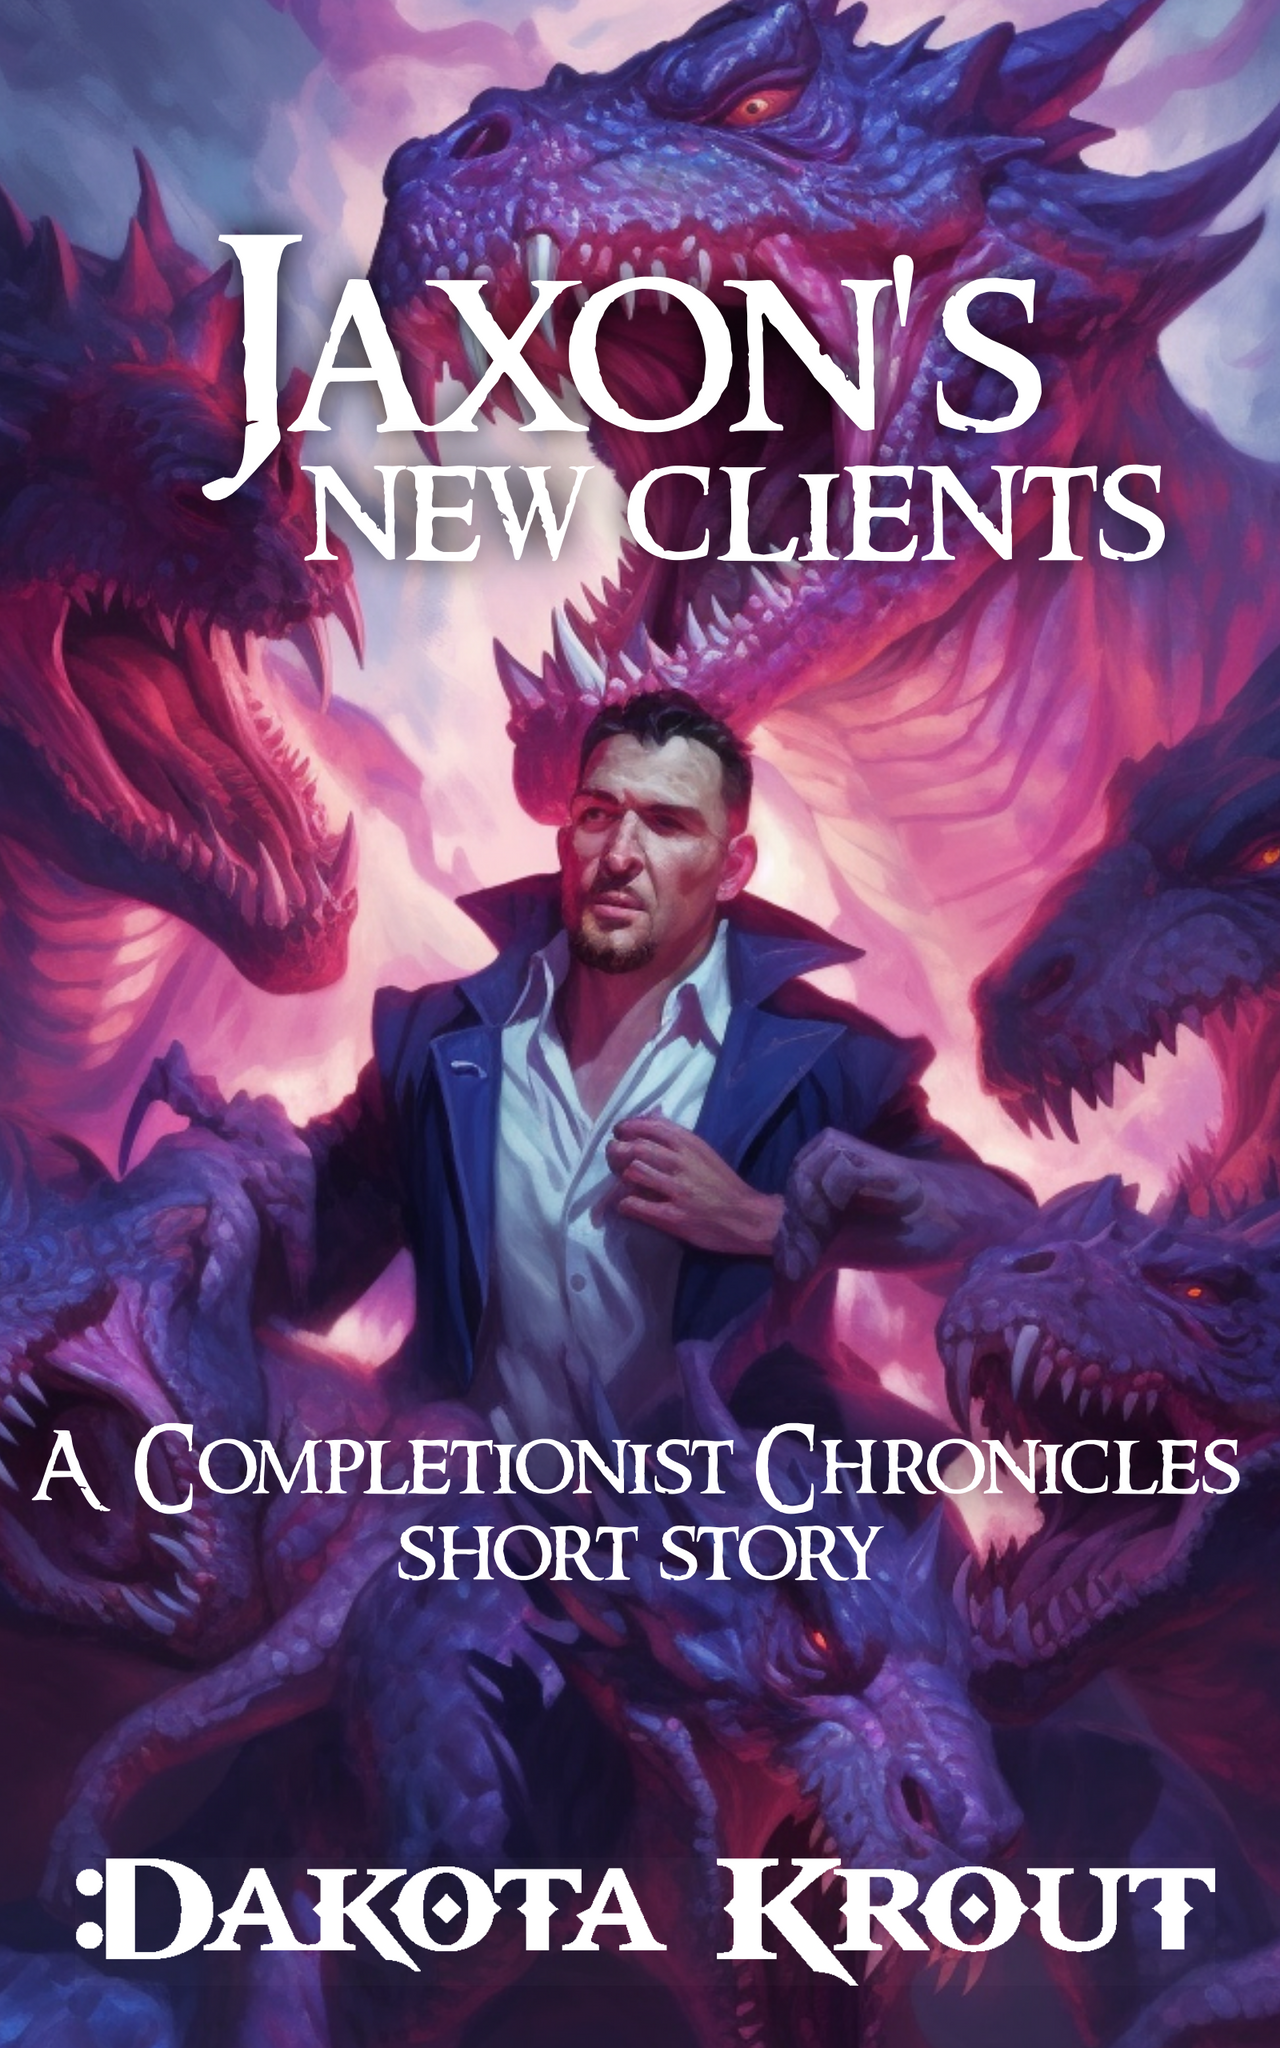 Jaxon's New Clients, A Completionist Chronicles Short Story